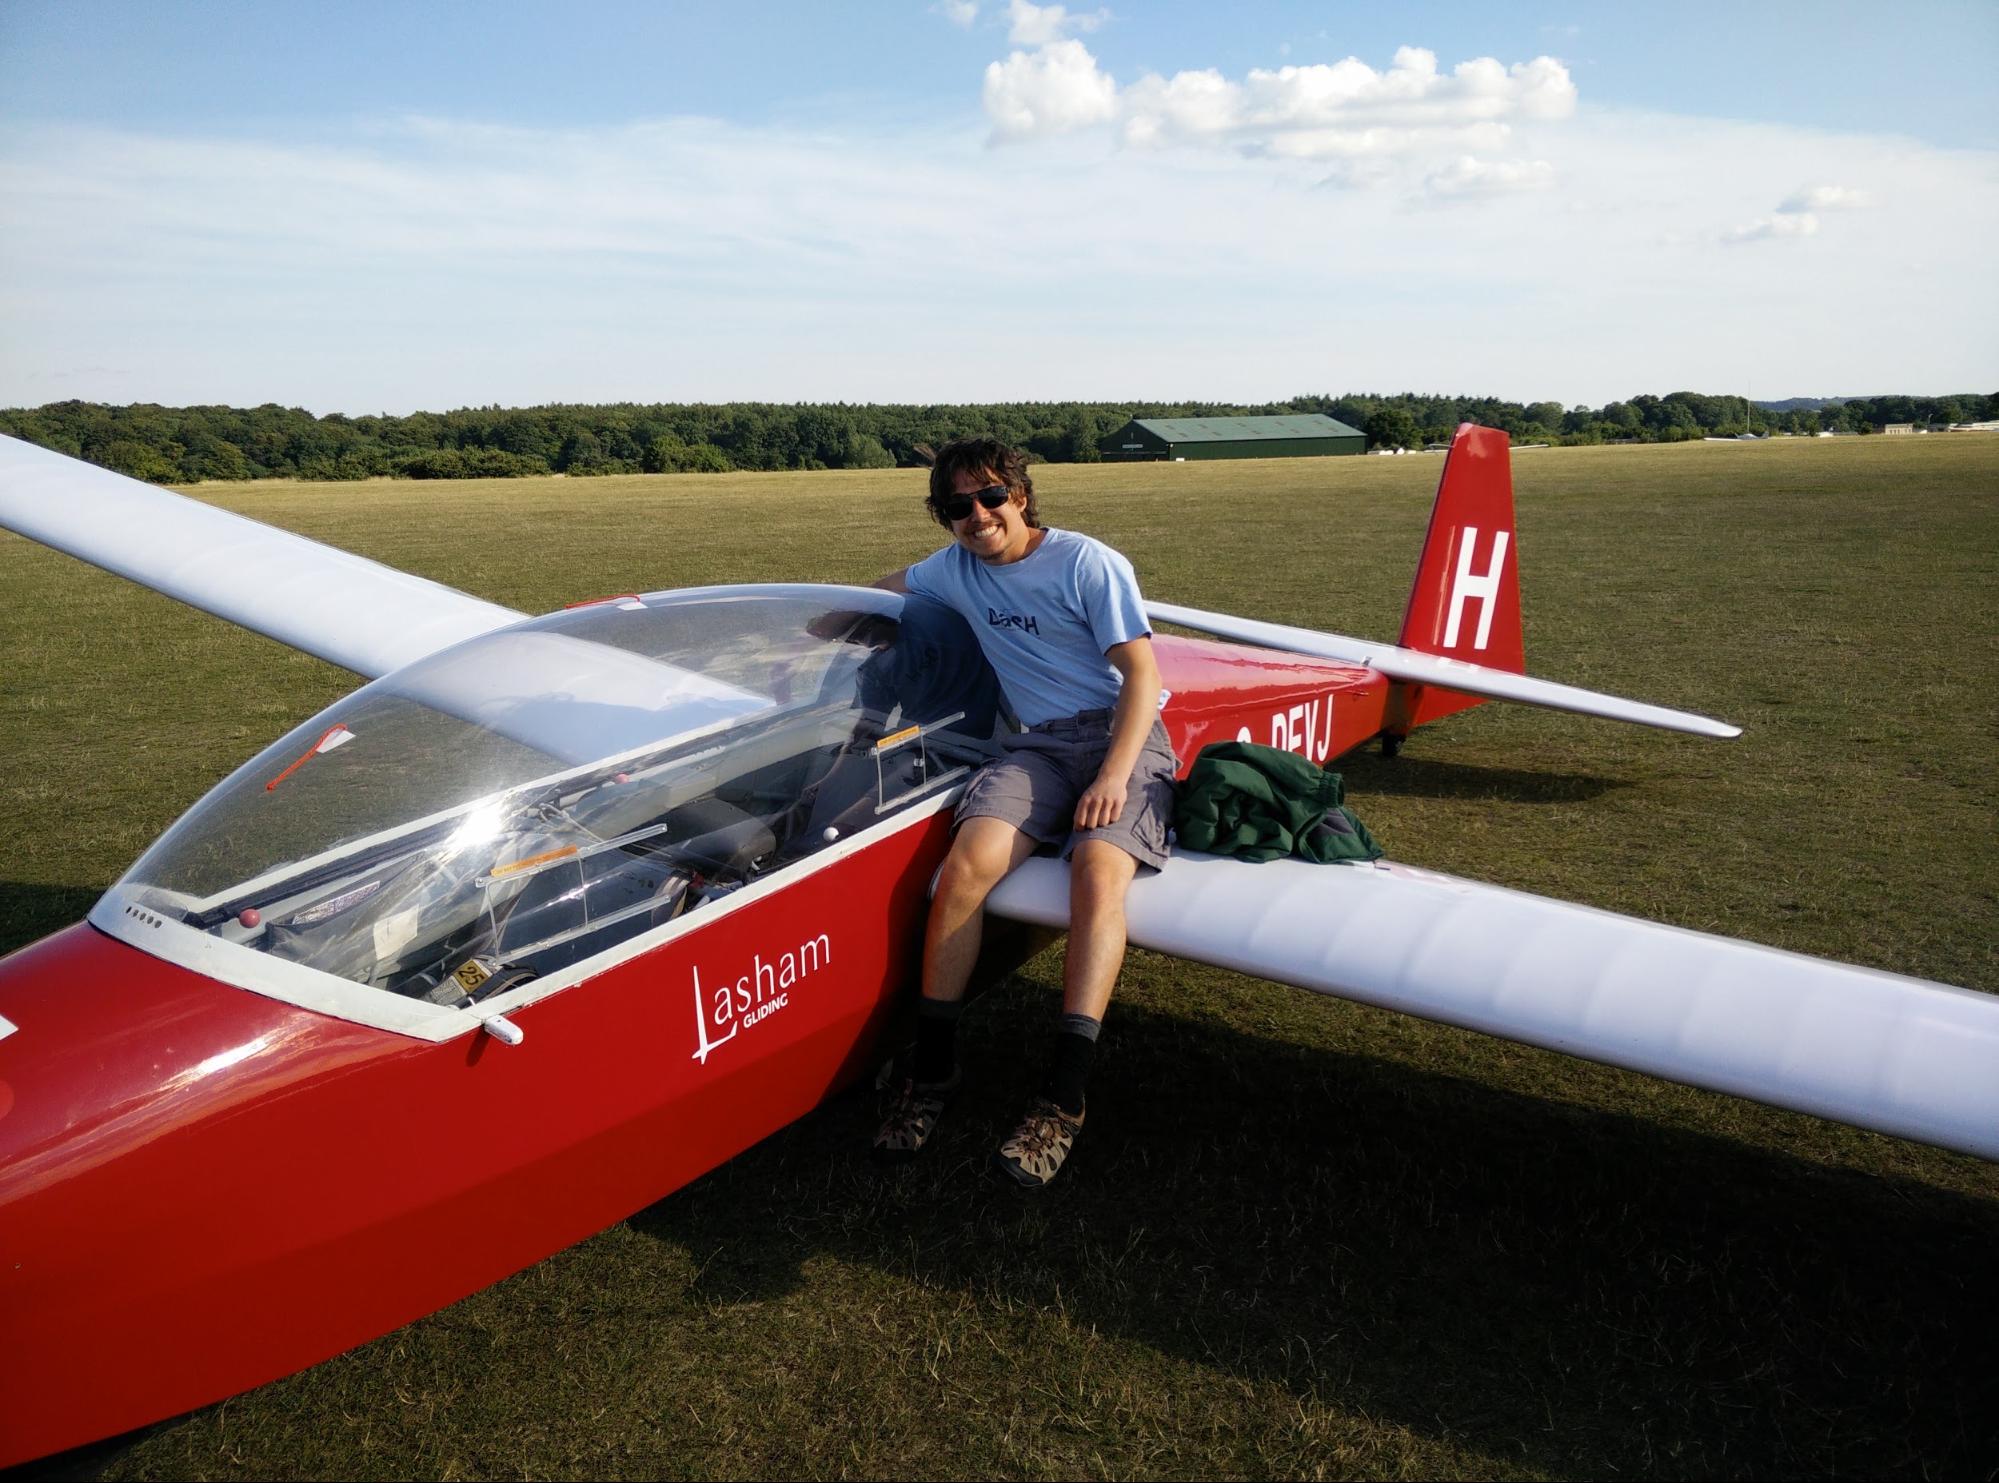 Me sitting on an ASK-13 glider at Lasham airfield in England